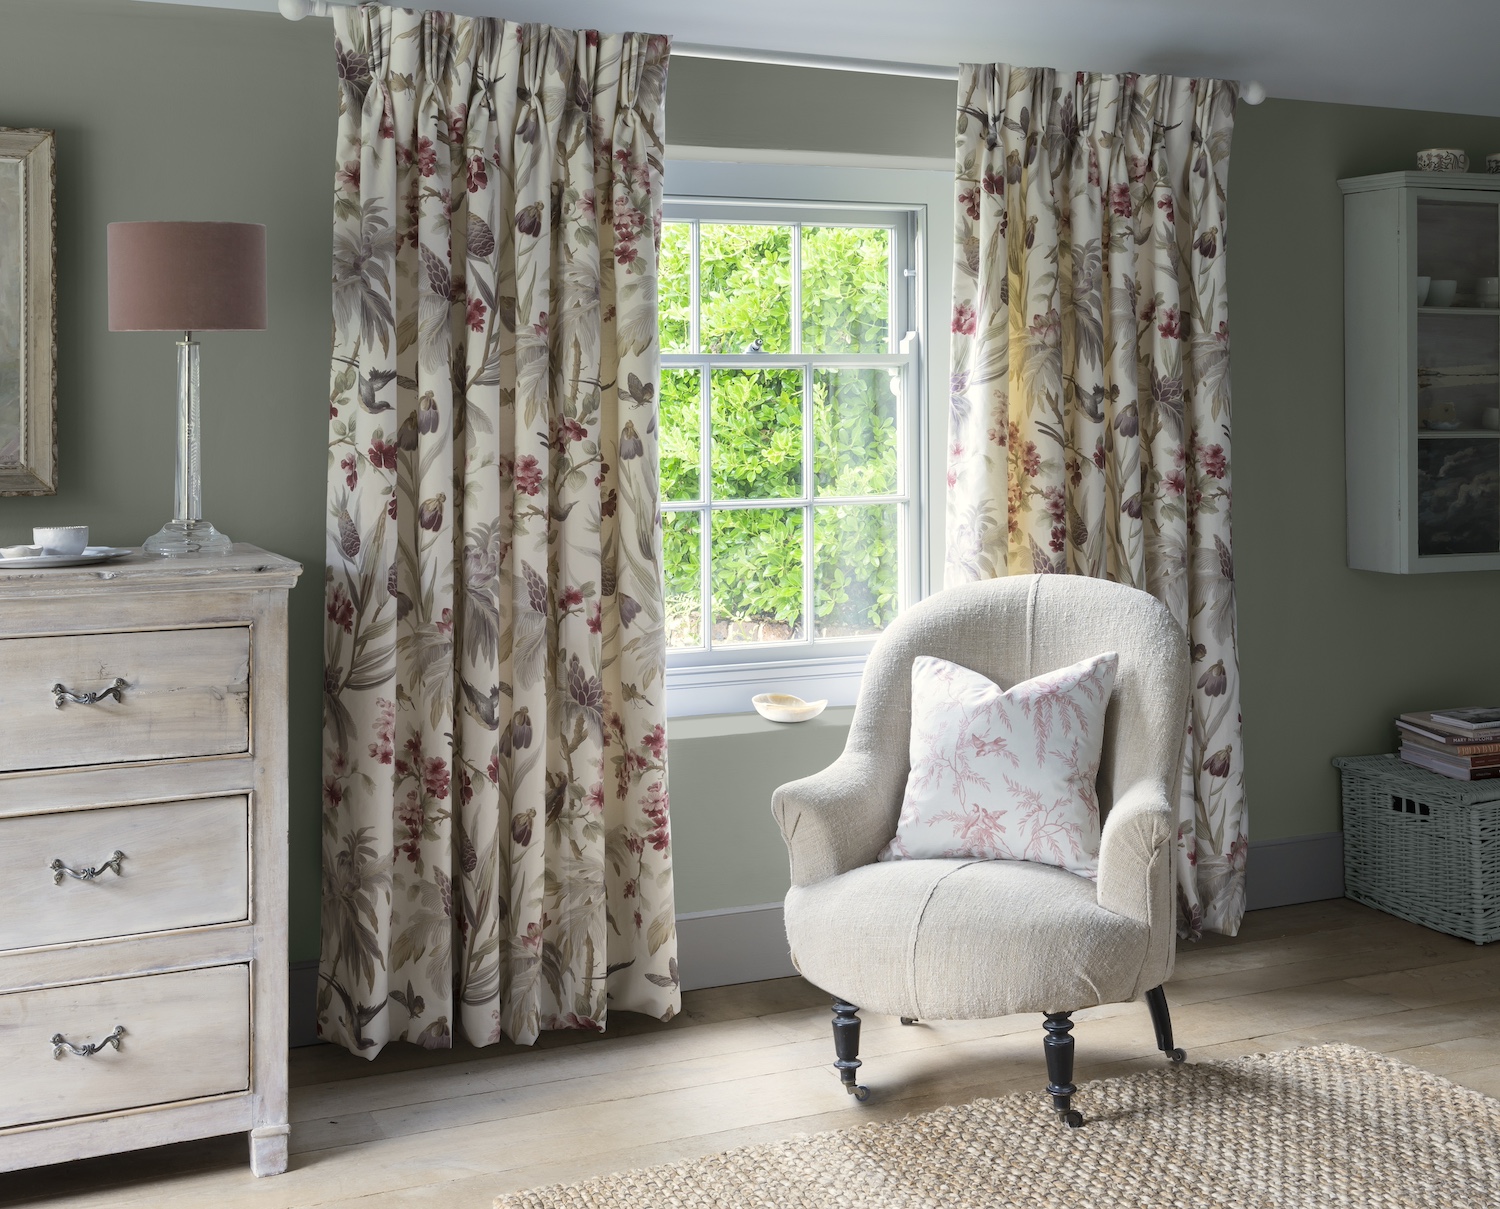 Patterned Made to Measure Curtains